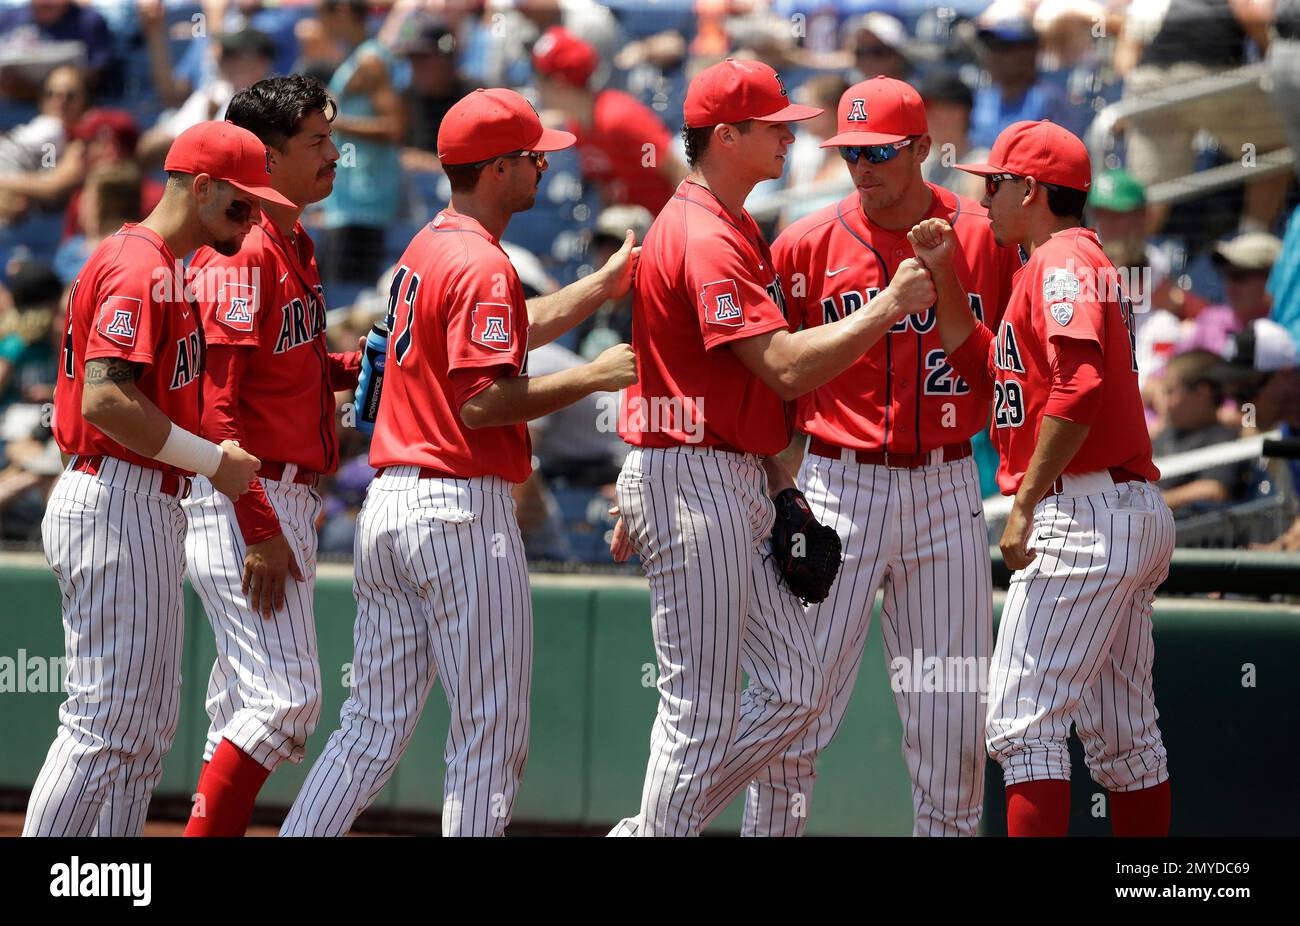 Arizona pitcher Bobby Dalbec, third from right, is congratulated